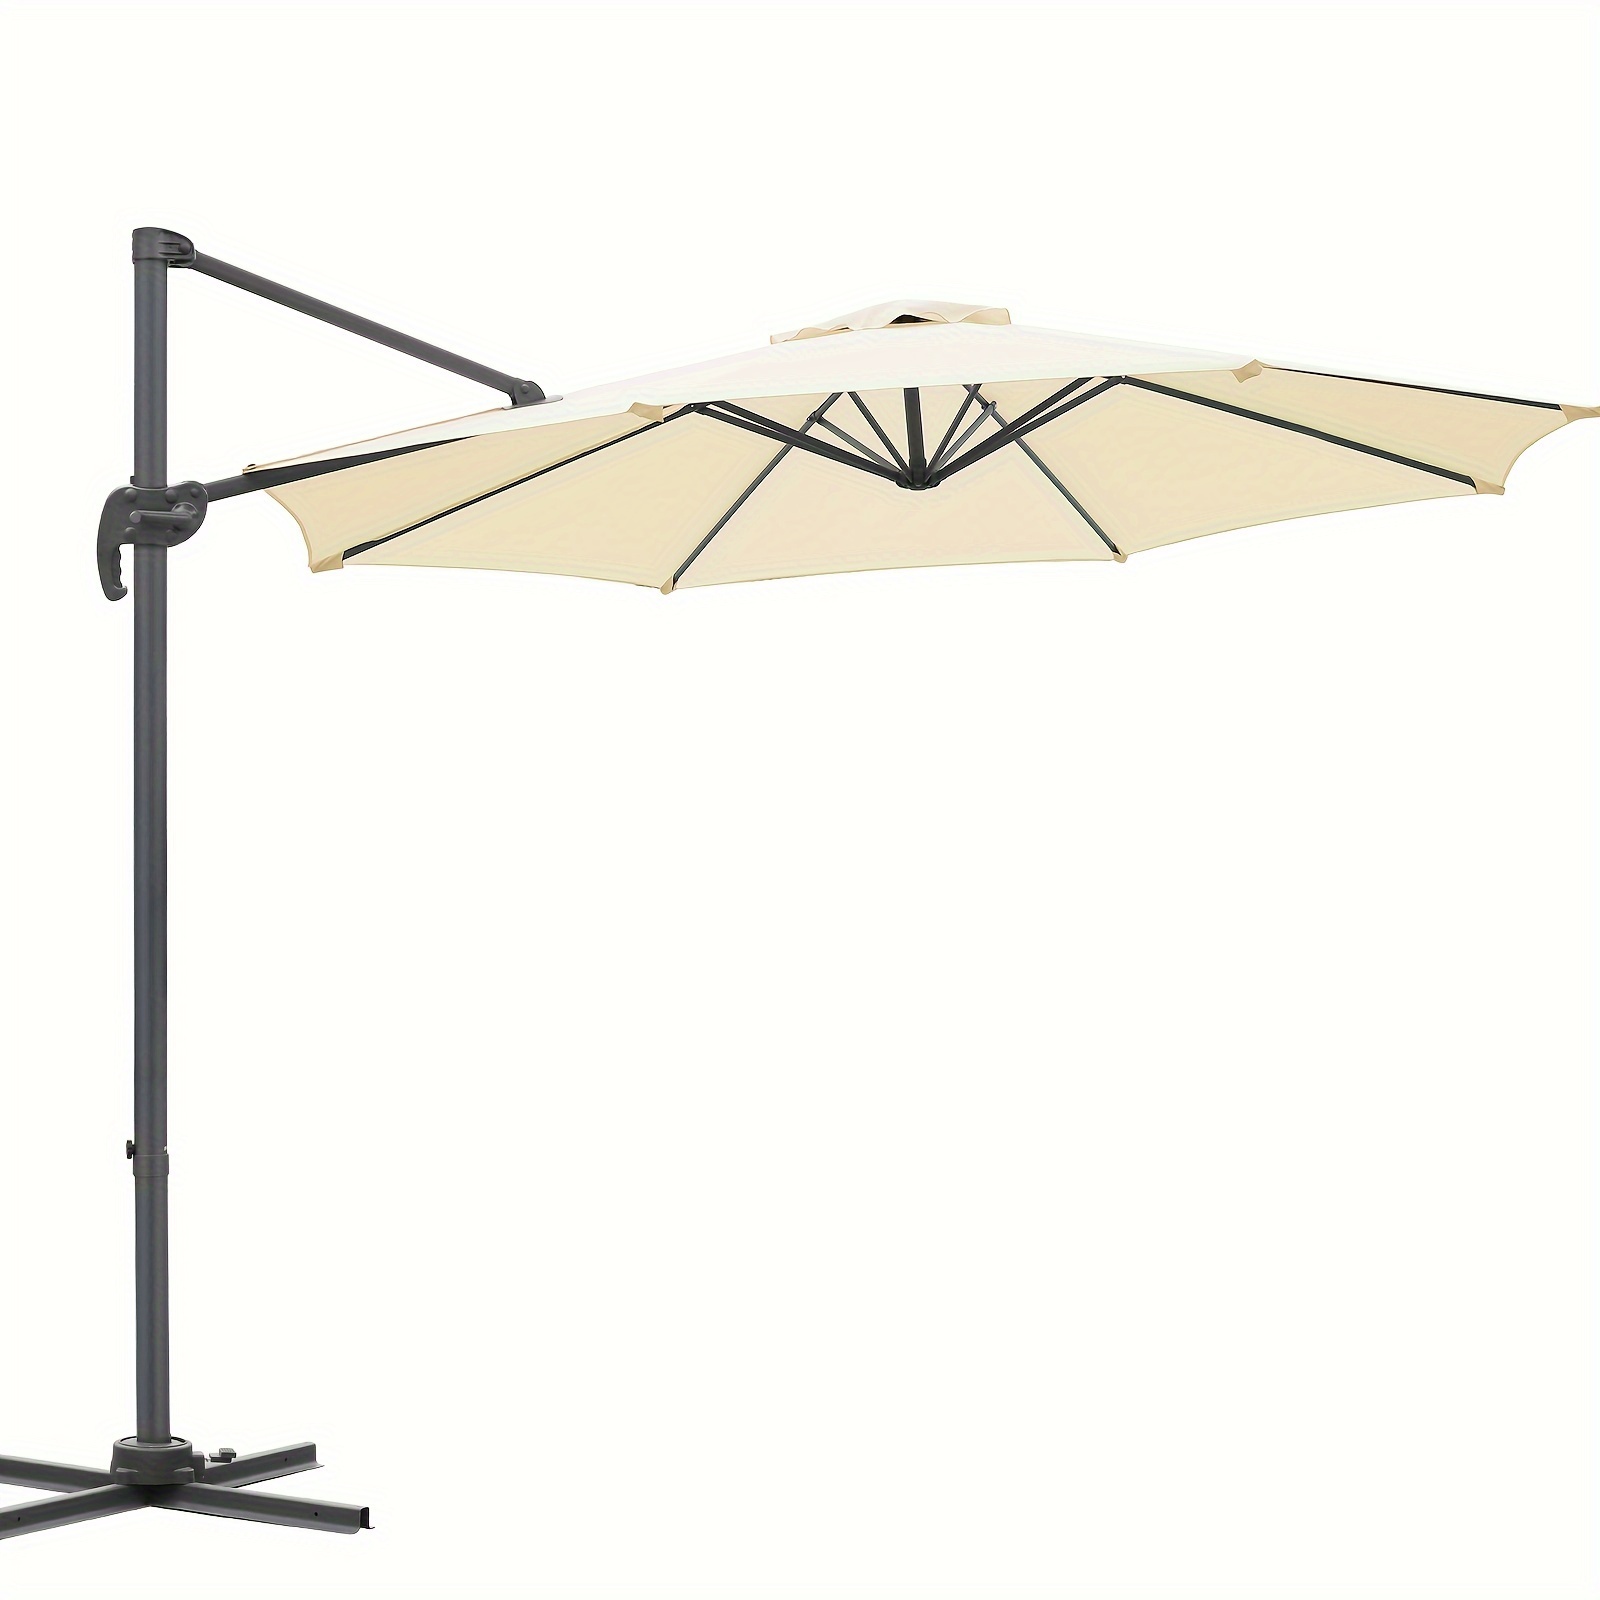 

Parasol 300 Cm With Crank Handle, 360° Rotatable Tilting Cantilevered Parasol, Made Of 180 G/m² Polyester, Sunproof And Waterproof, Round Garden Parasol, Terrace Parasol, Outdoor Crank Parasol, Beige